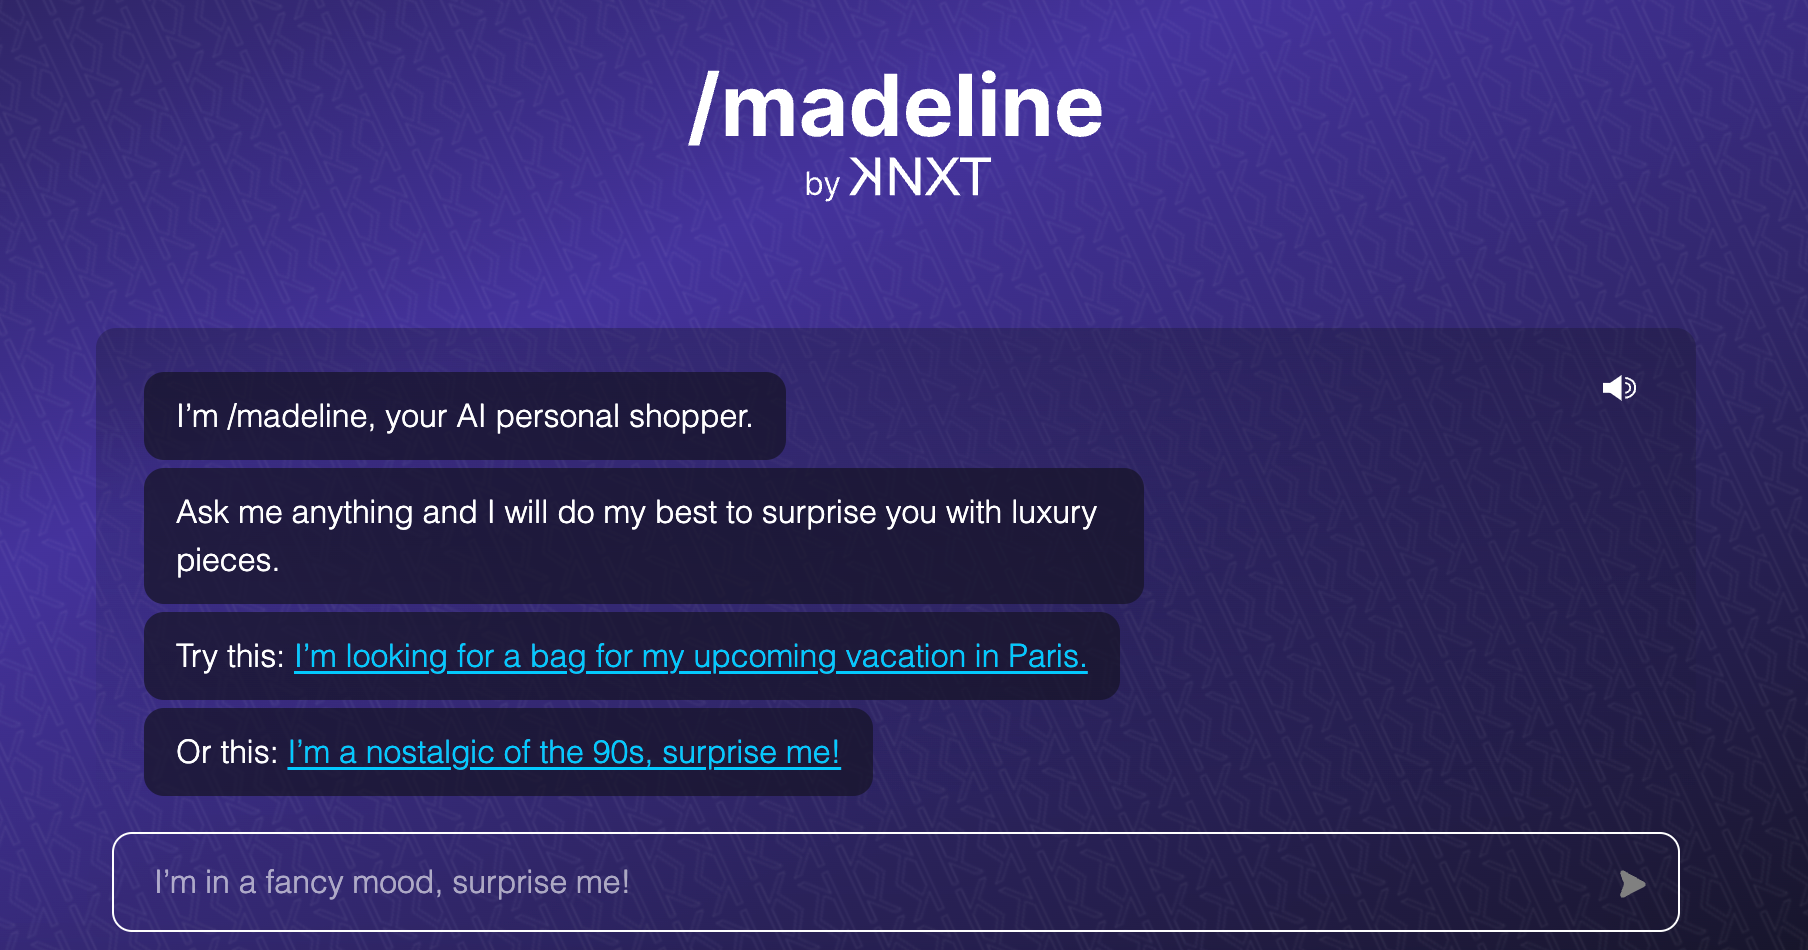 /madeline is KNXT’s AI personal shopper powered by ChatGPT. Photo: Screenshot